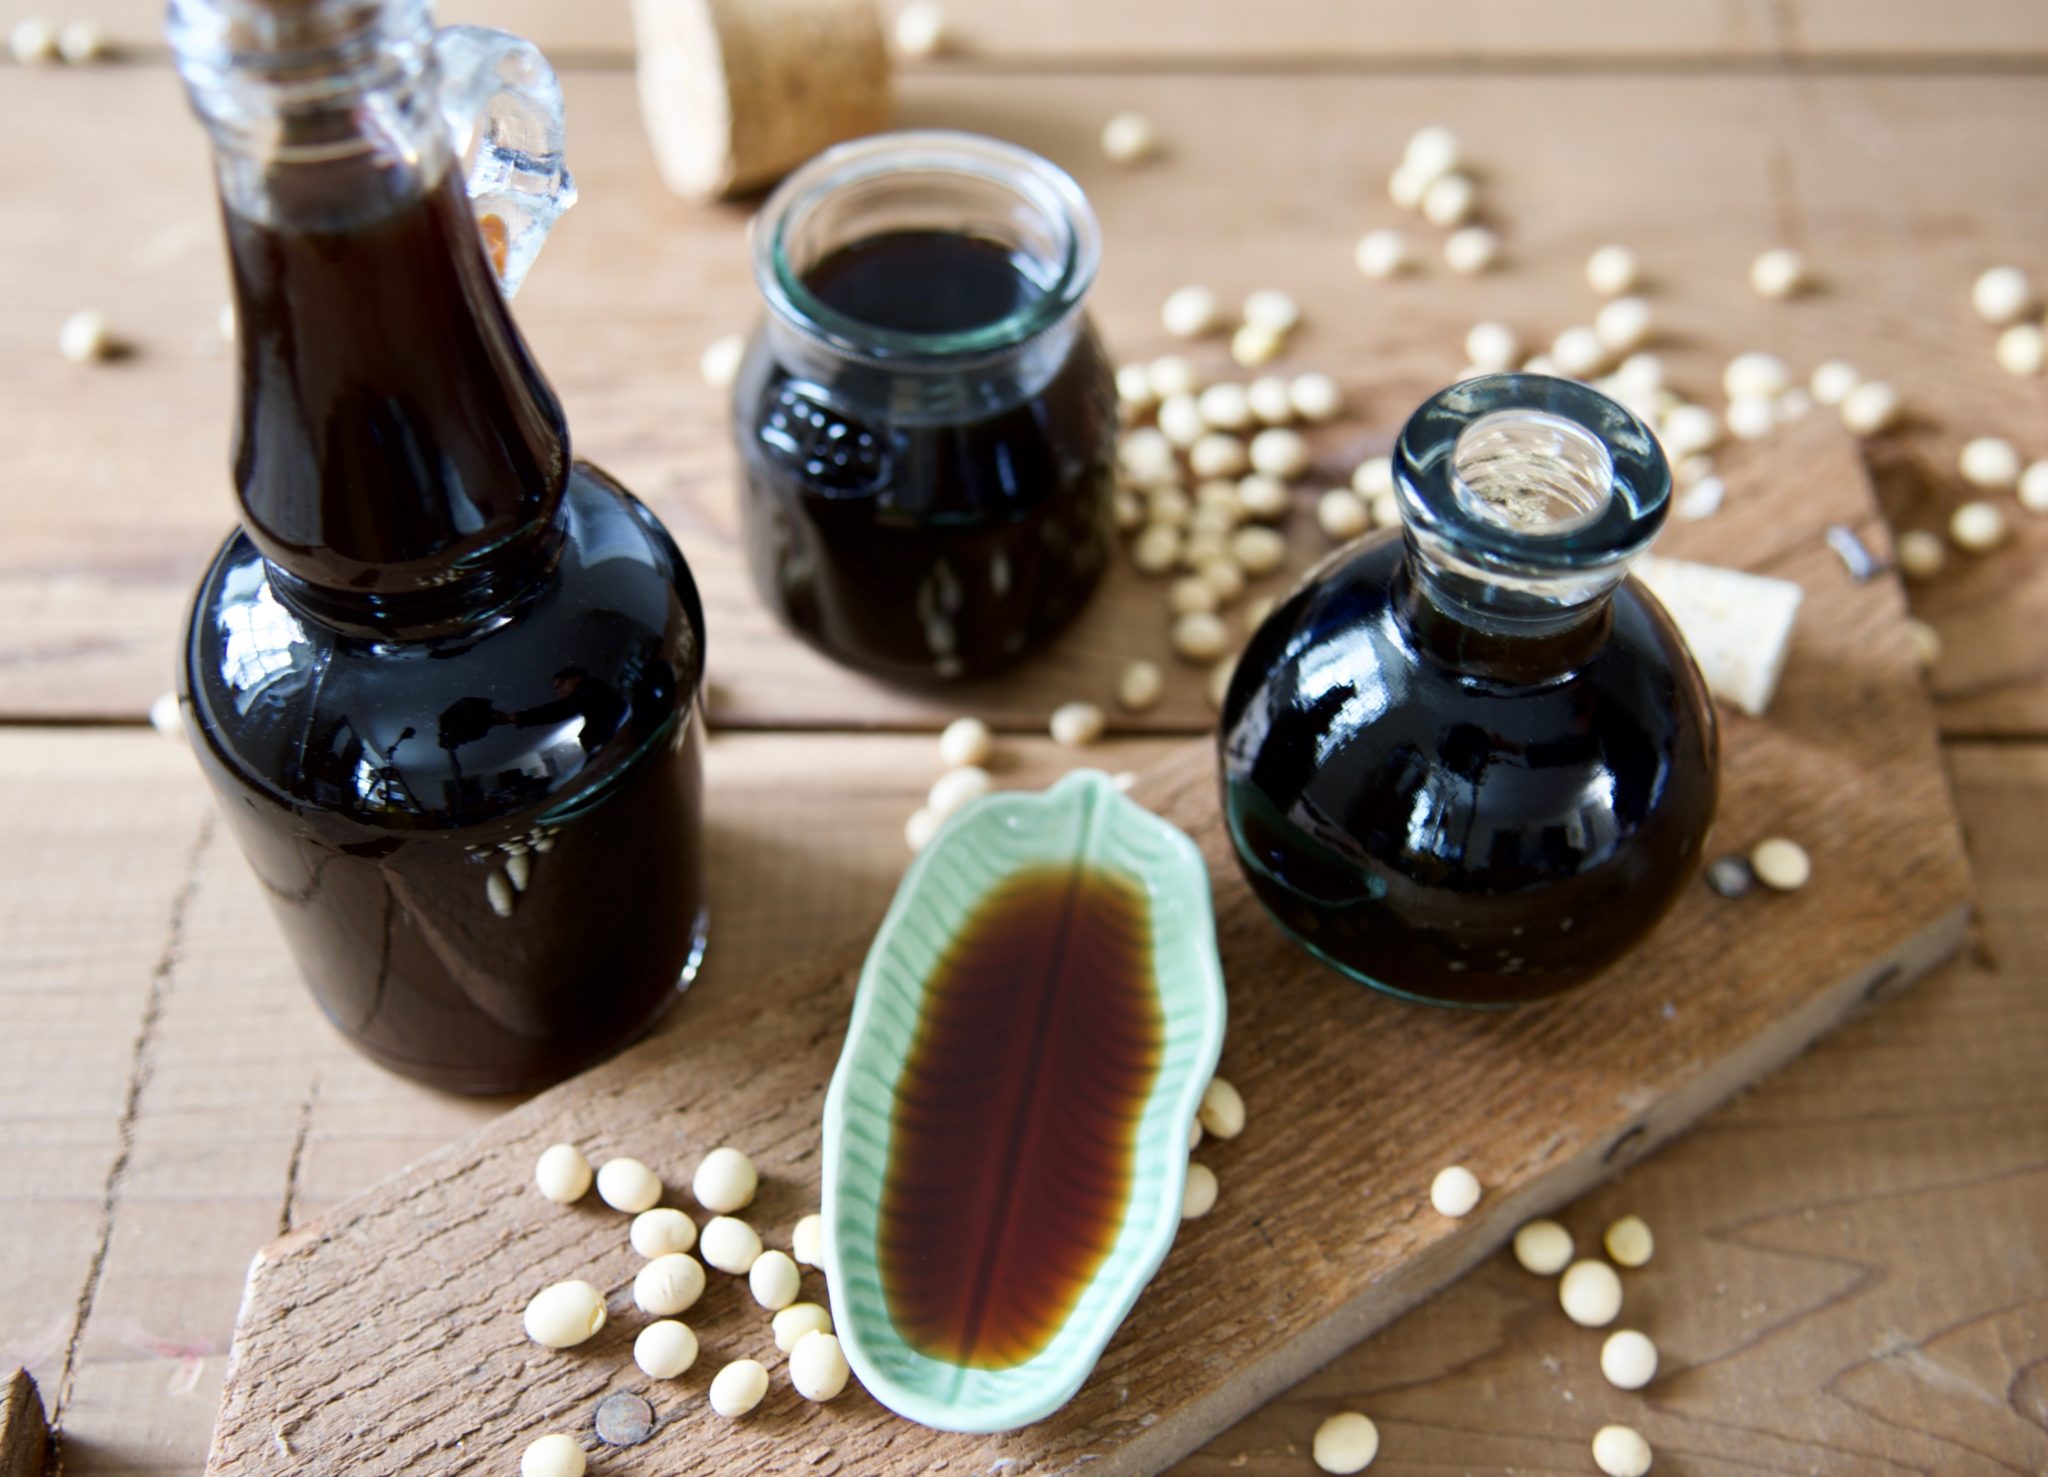 how to make soy sauce at home (Korean style from start to finish)